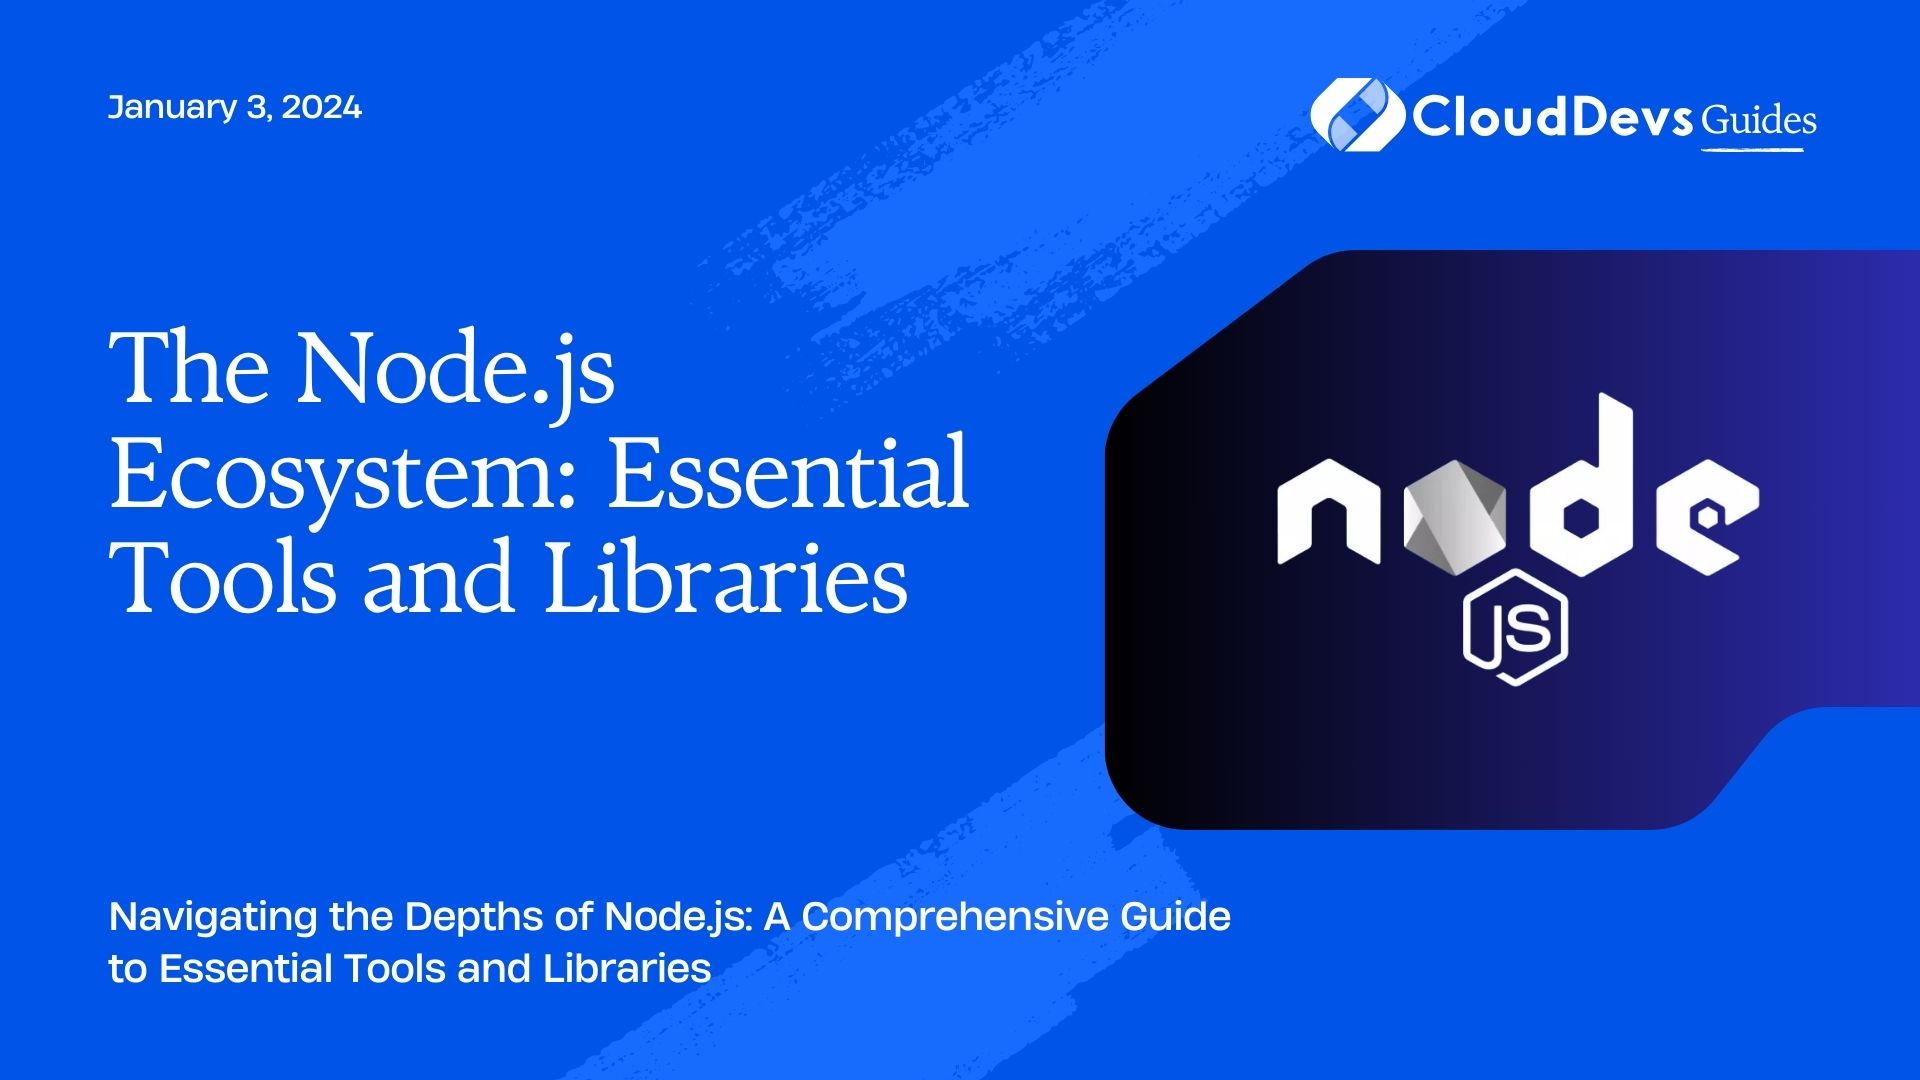 The Node.js Ecosystem: Essential Tools and Libraries